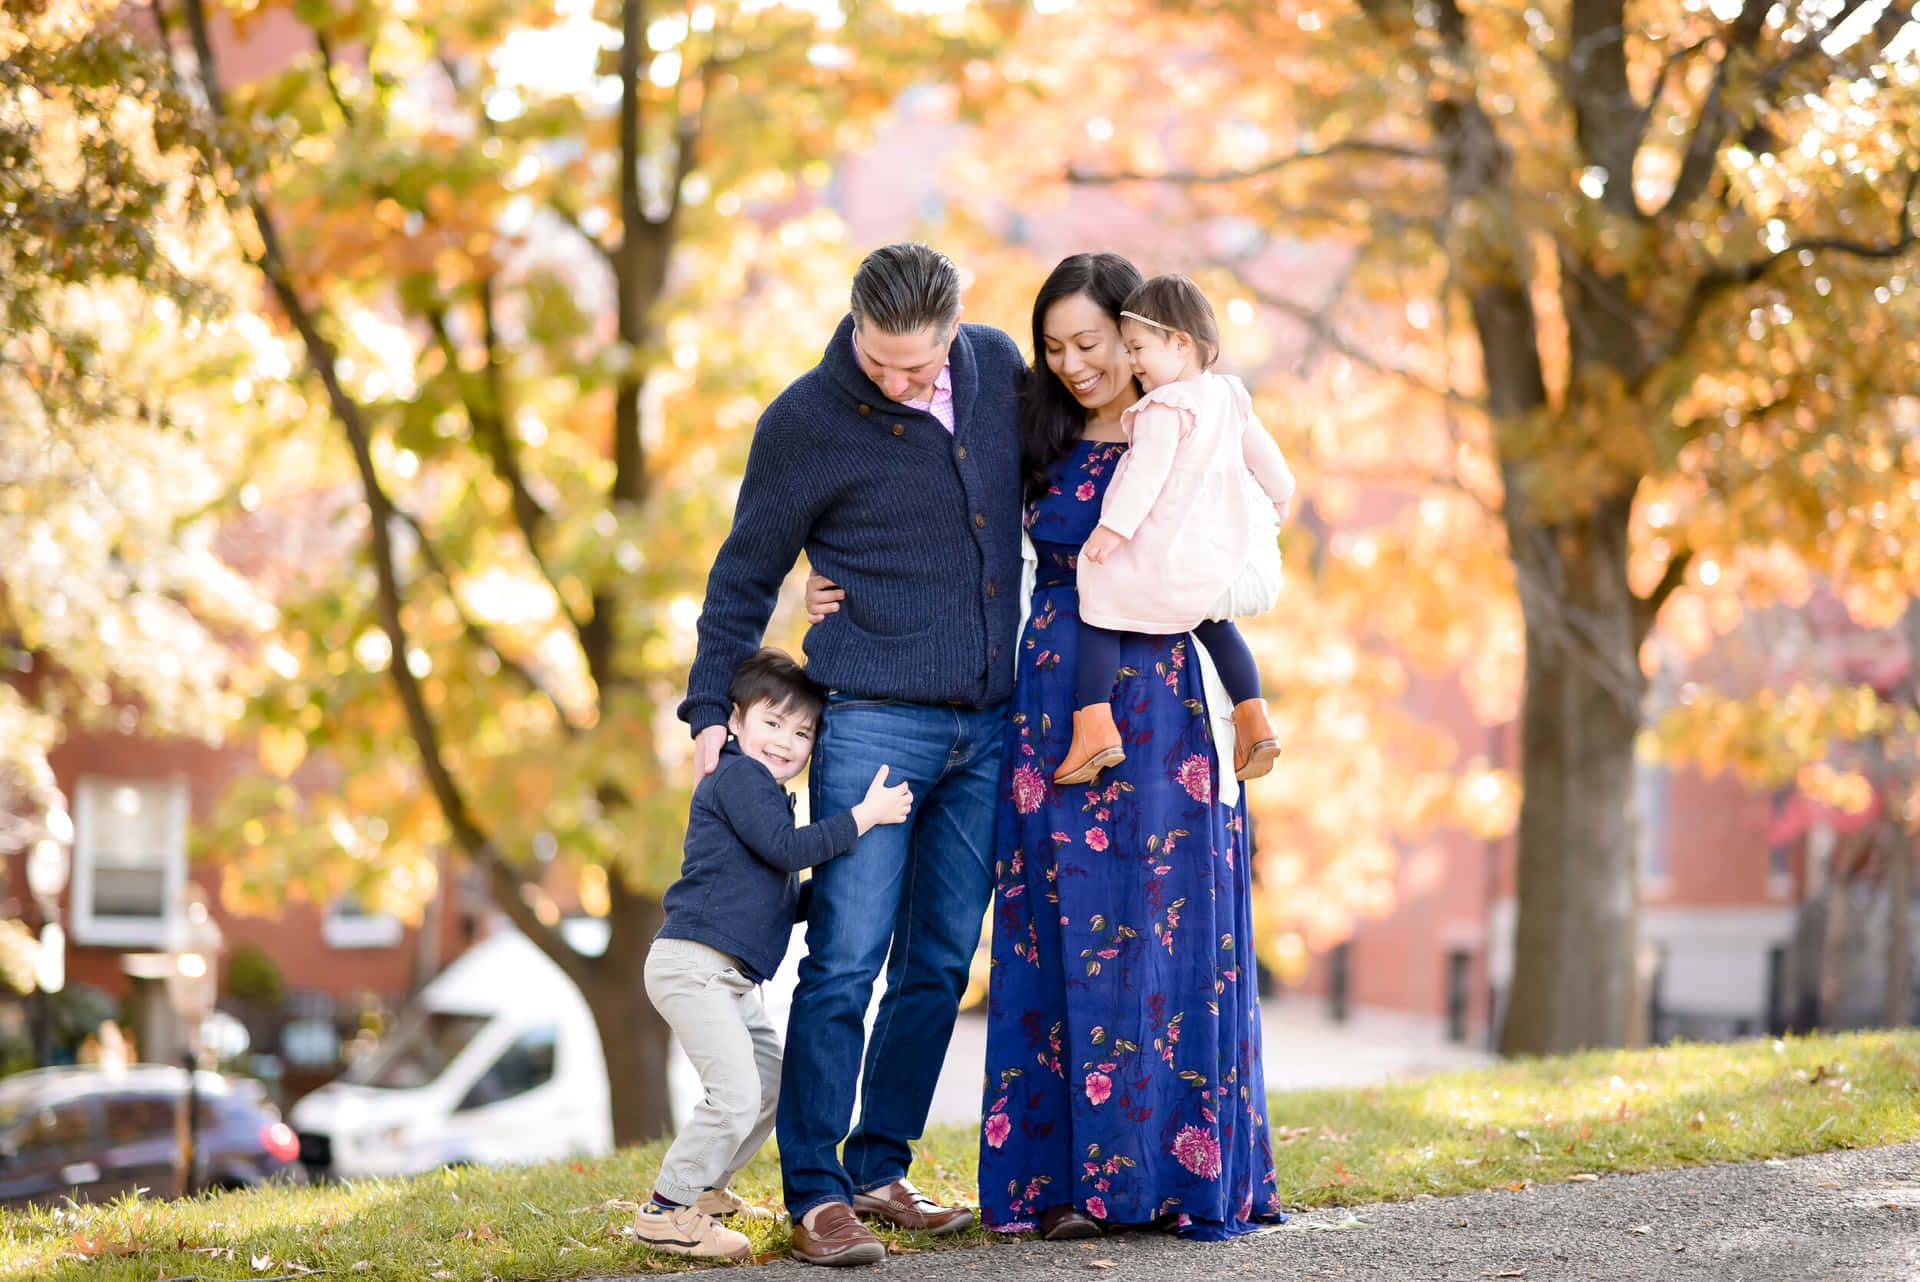 "A happy Fall family capturing the moment"